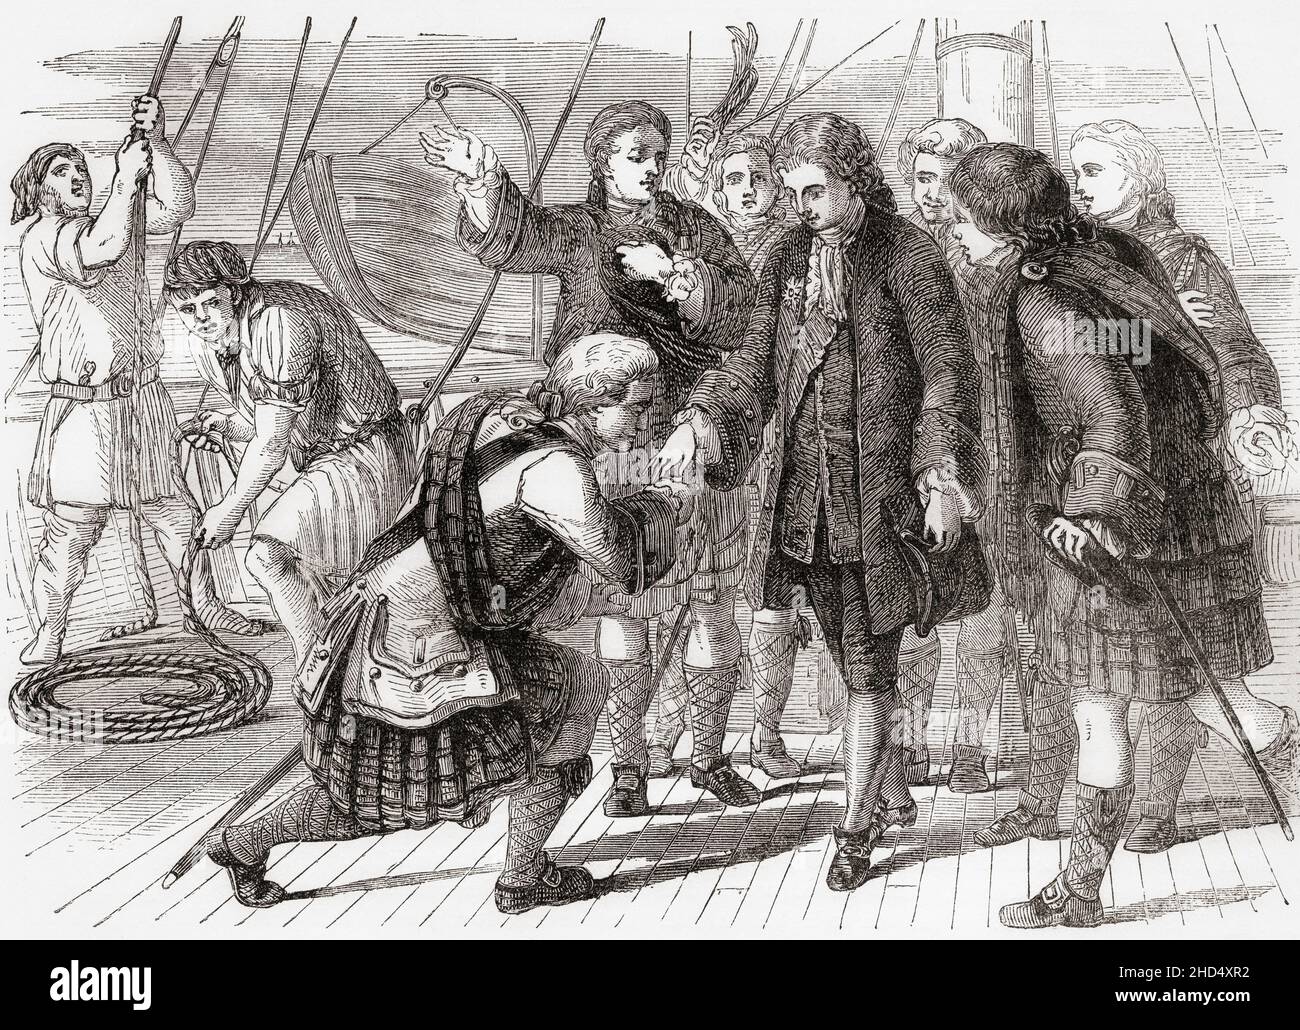 Young Moidart, kneeling, swearing allegiance to Prince Charles Stuart aboard the Du Teillay, 1745.  Charles Edward Louis John Casimir Sylvester Severino Maria Stuart, 1720 – 1788.  Elder son of James Francis Edward Stuart, and Stuart claimant to the throne of Great Britain after 1766 as 'Charles III', aka the Young Pretender, the Young Chevalier and Bonnie Prince Charlie.  From Cassell's Illustrated History of England, published c.1890. Stock Photo